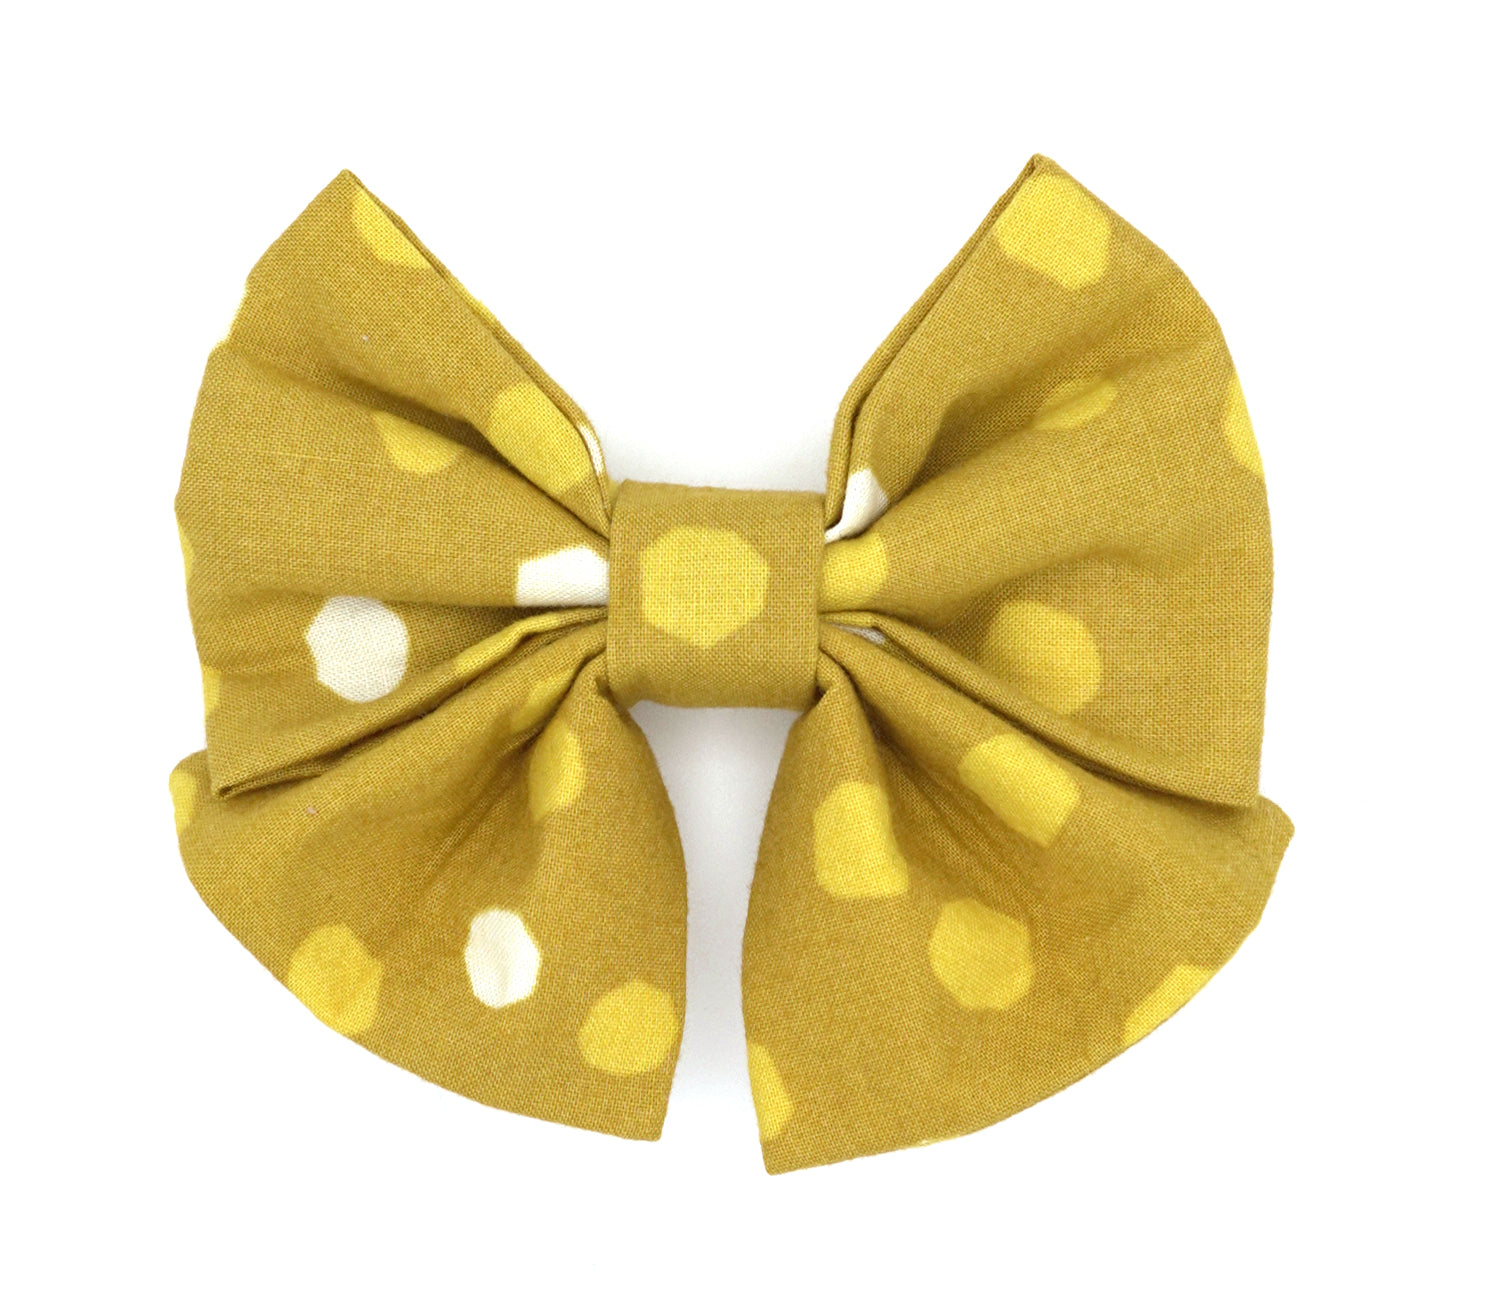 Handmade cotton bow tie with tails for dogs (or other pets). Elastic straps on back with snaps make it easy to add to collar, harness, or leash. Yellow background with bright yellow and cream irregular spots.